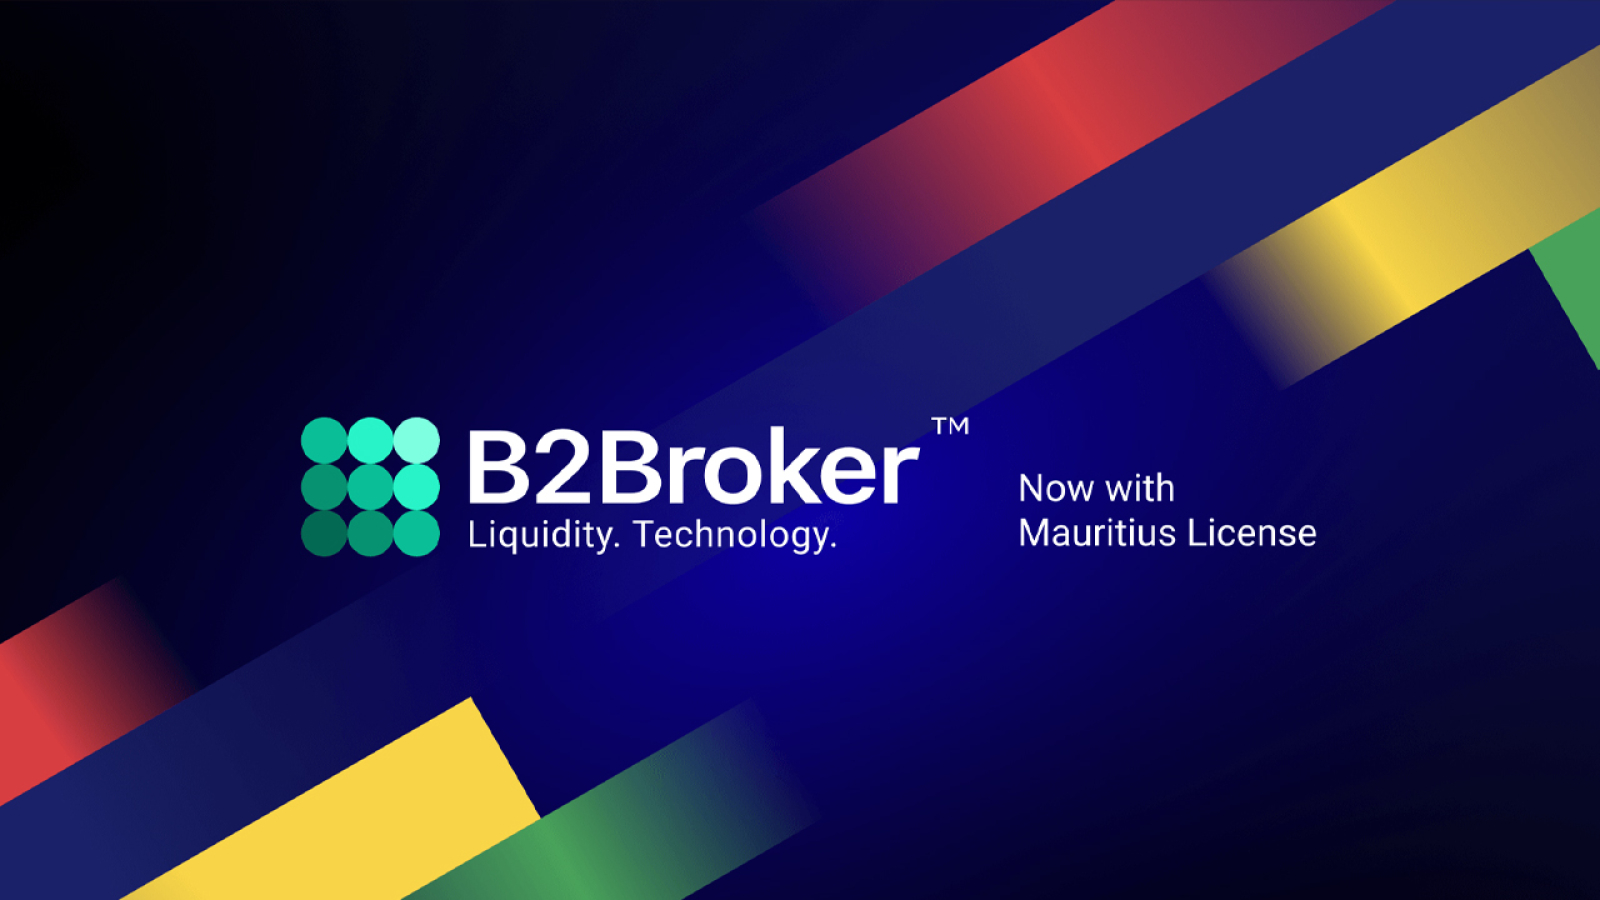 B2Broker Group Has Obtained a Mauritius FSC Licence, Permitting it to Provide Multi-Asset Brokerage Services